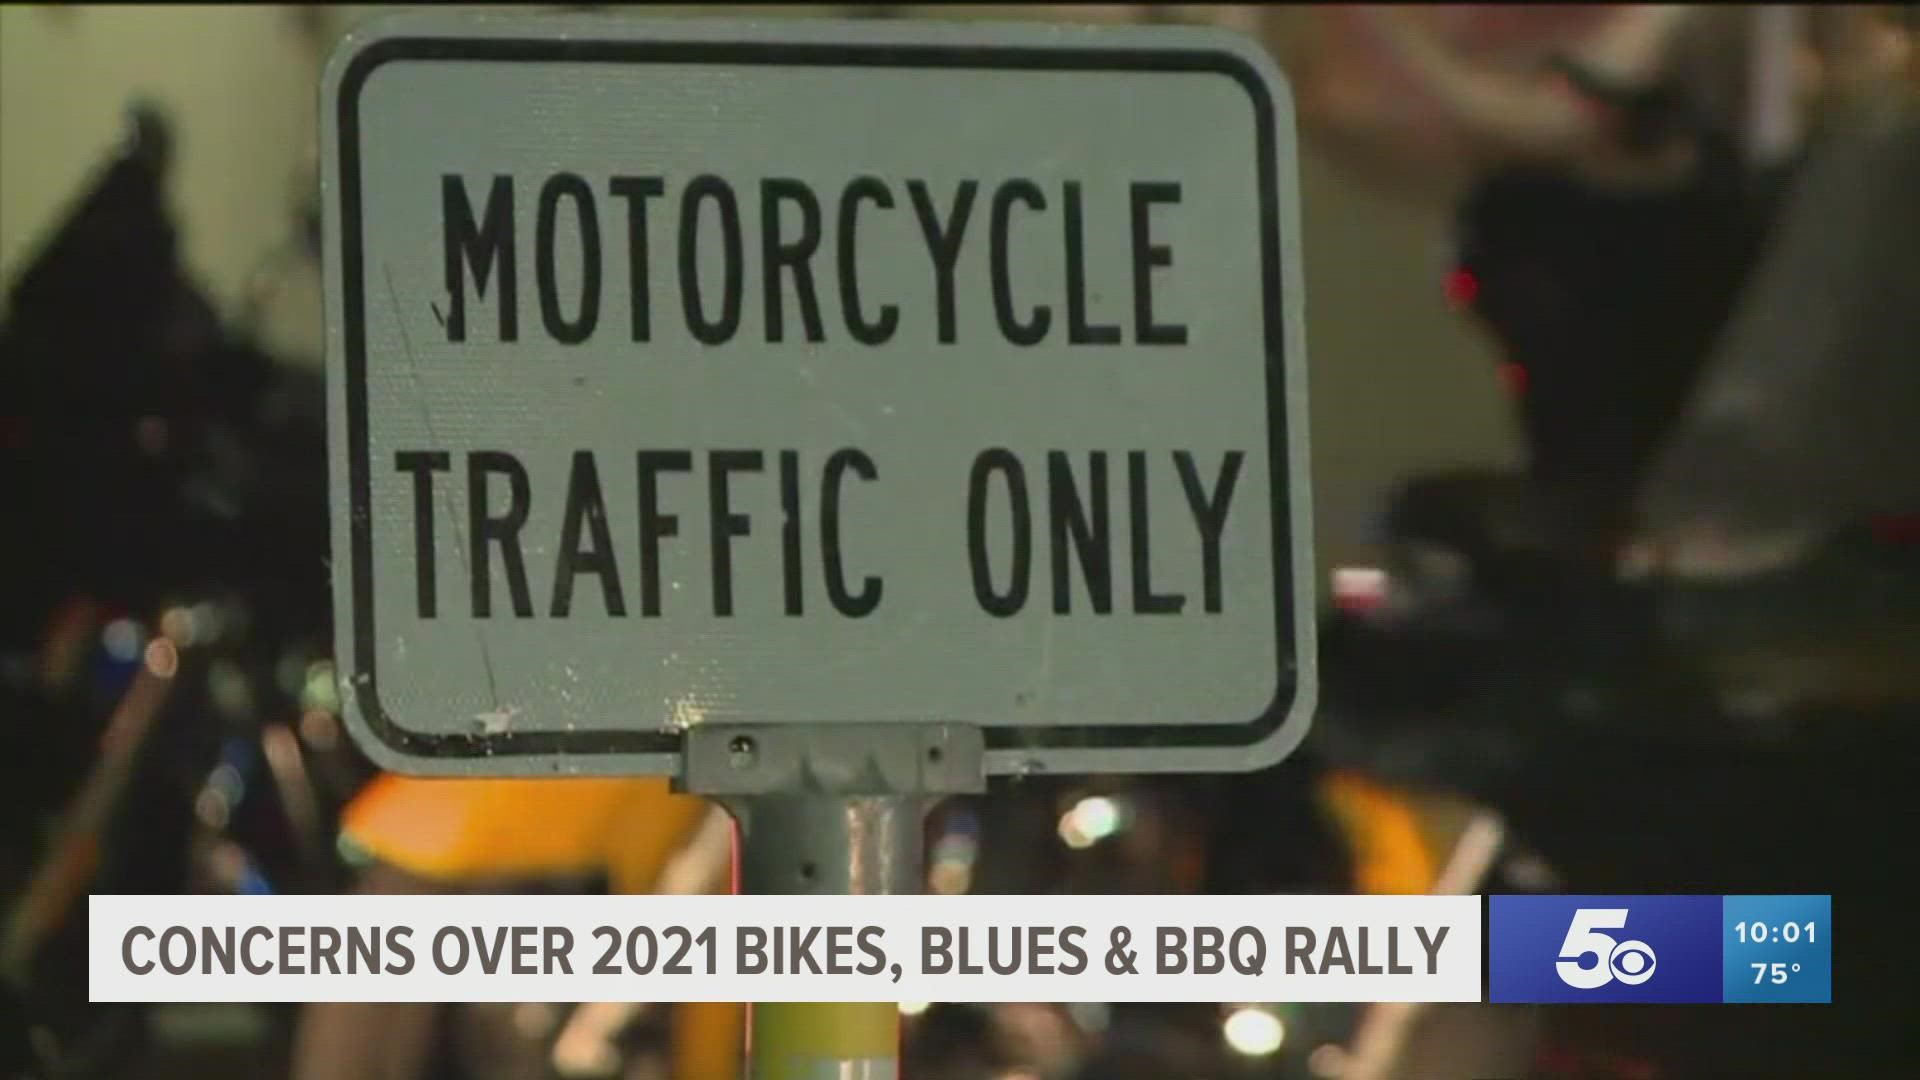 Bikes, Blues & BBQ typically brings thousands from across the nation to Northwest Arkansas. Event organizers canceled last year's event due to the pandemic.